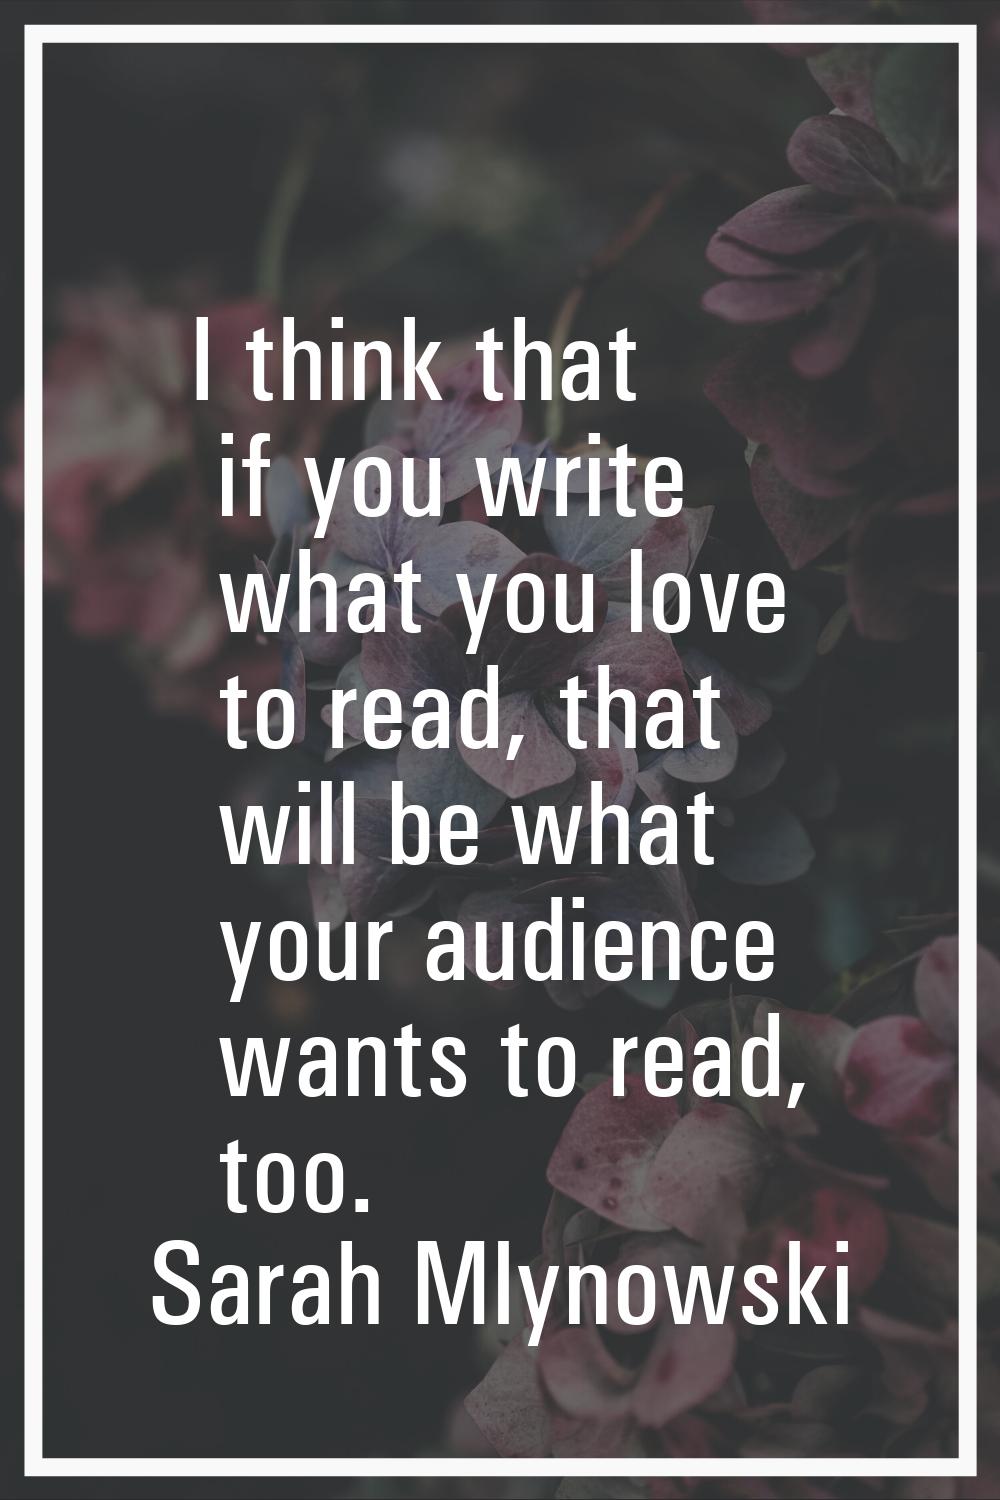 I think that if you write what you love to read, that will be what your audience wants to read, too